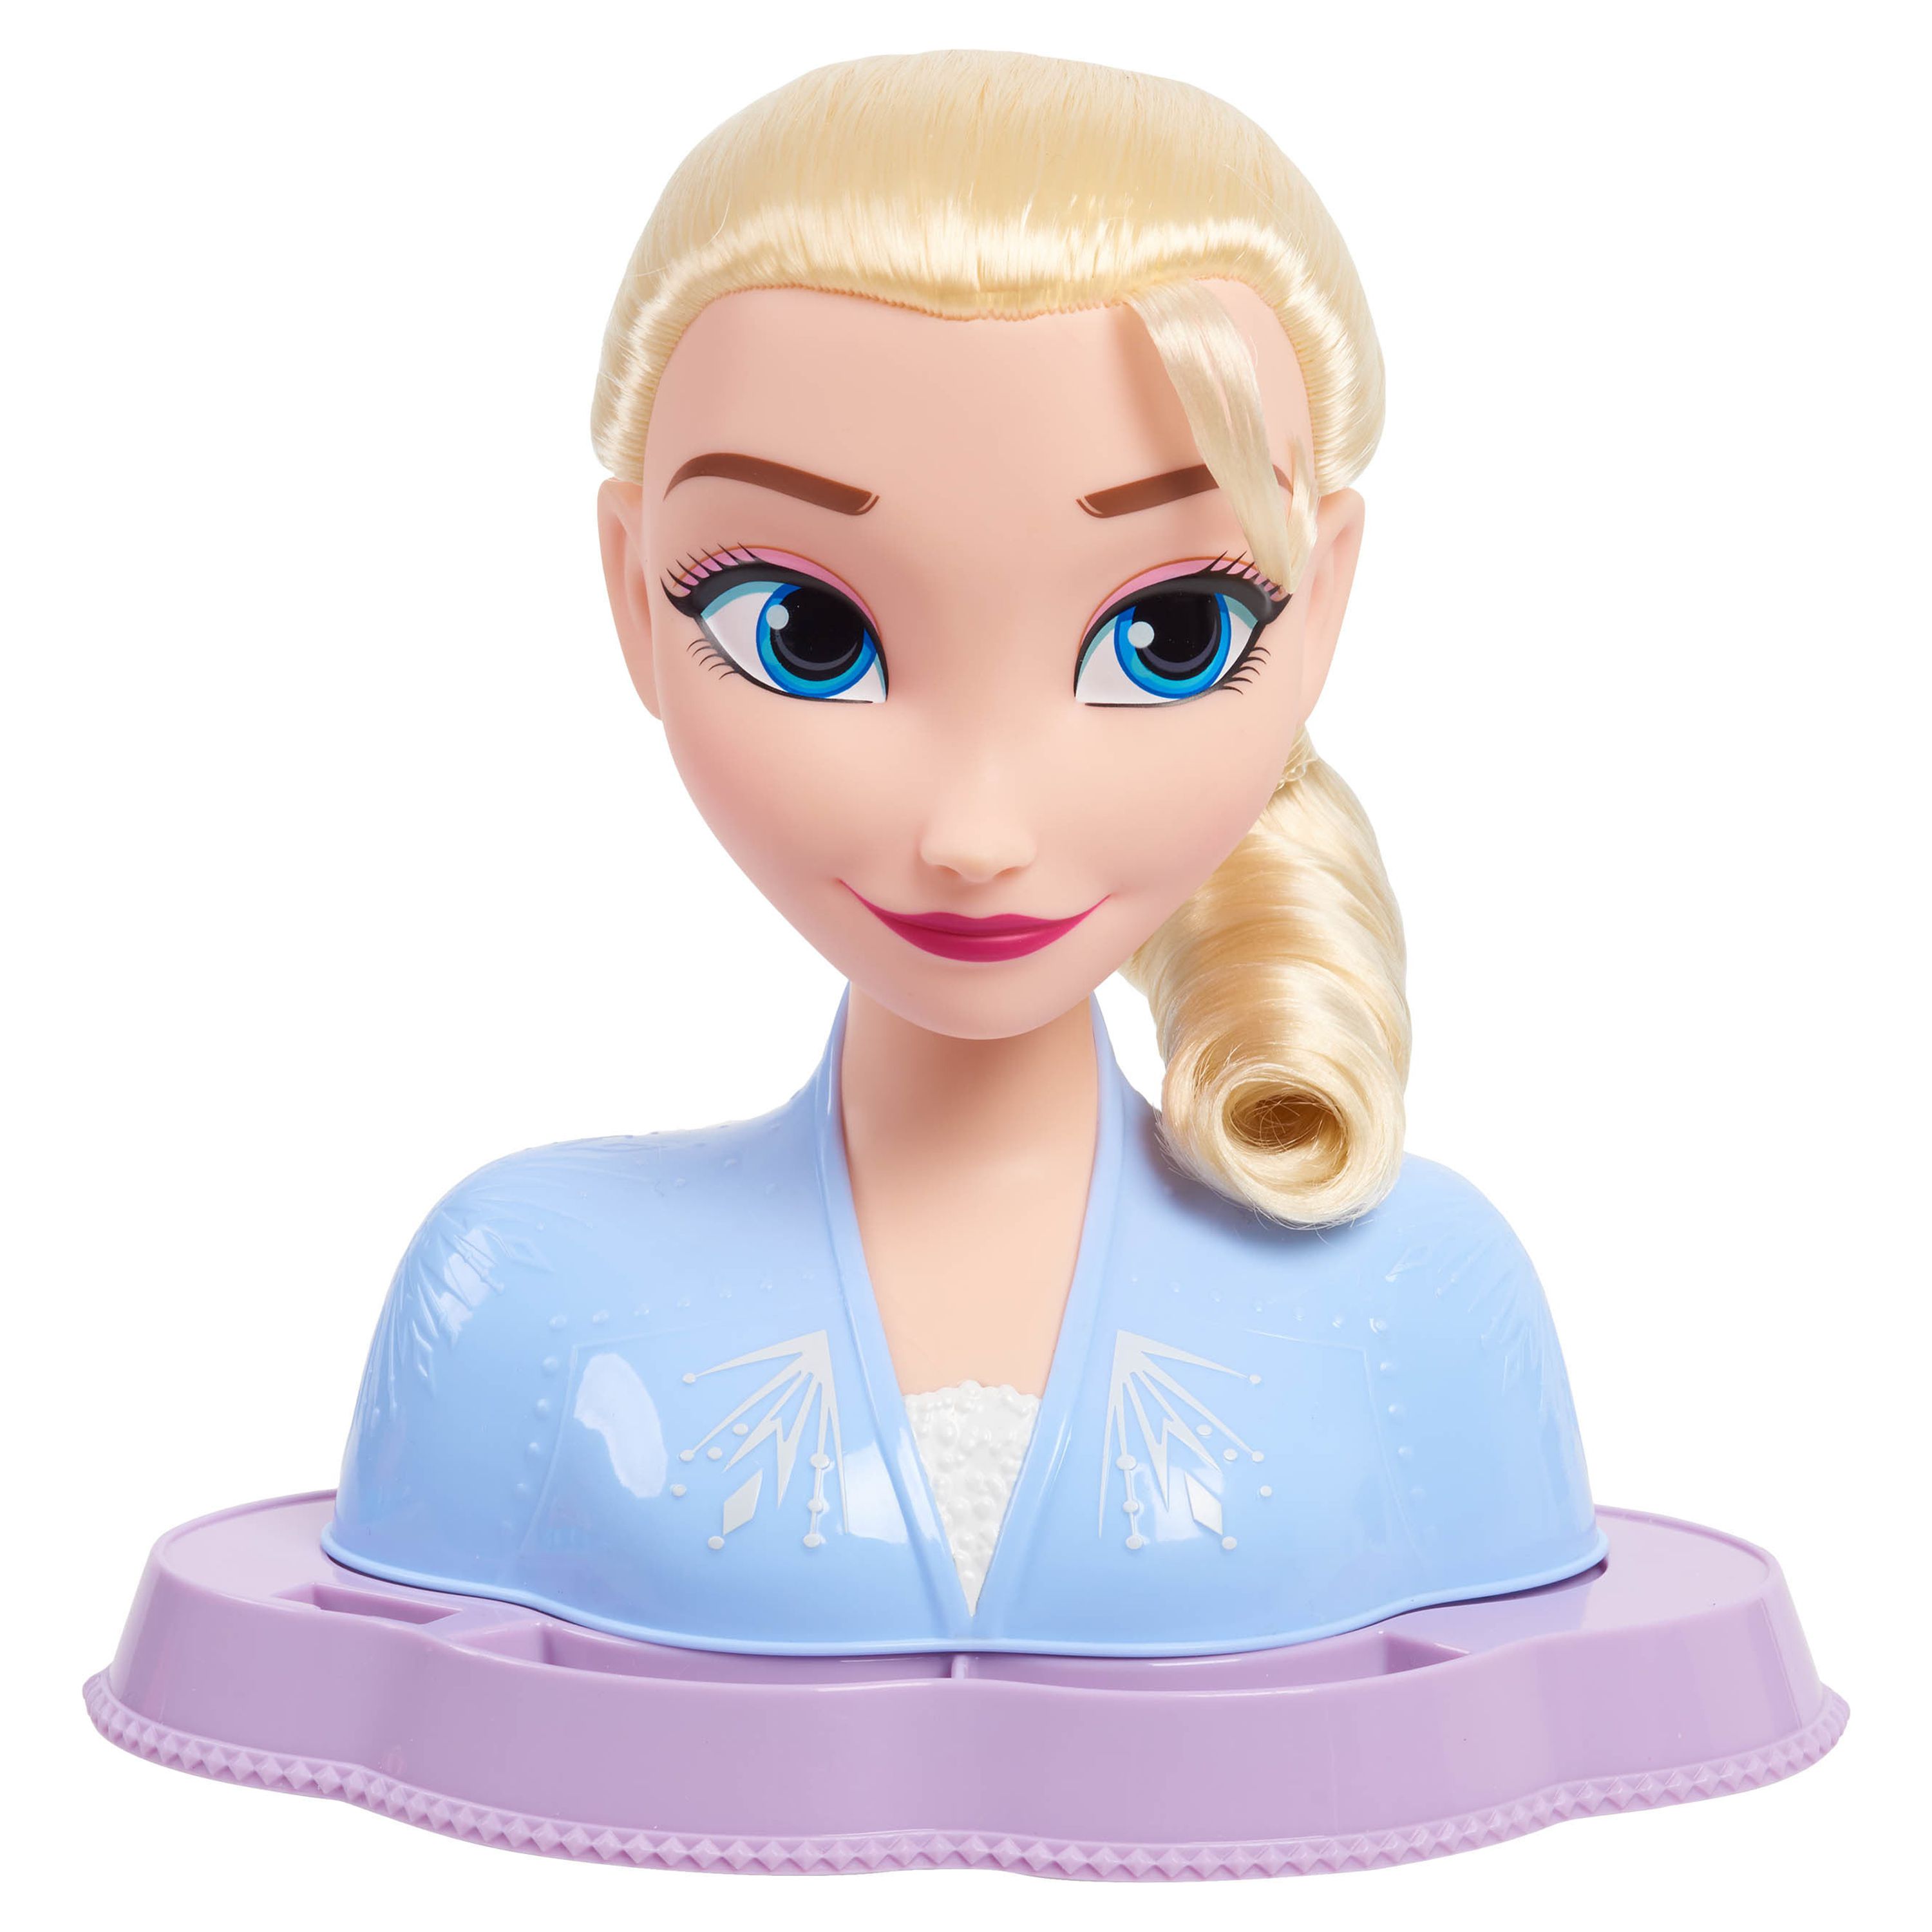 Disney Frozen Elsa Styling Head, Blonde Hair, 14 Piece Pretend Play Set, Wear and Share Accessories, Officially Licensed Kids Toys for Ages 3 Up, Gifts and Presents - image 2 of 2